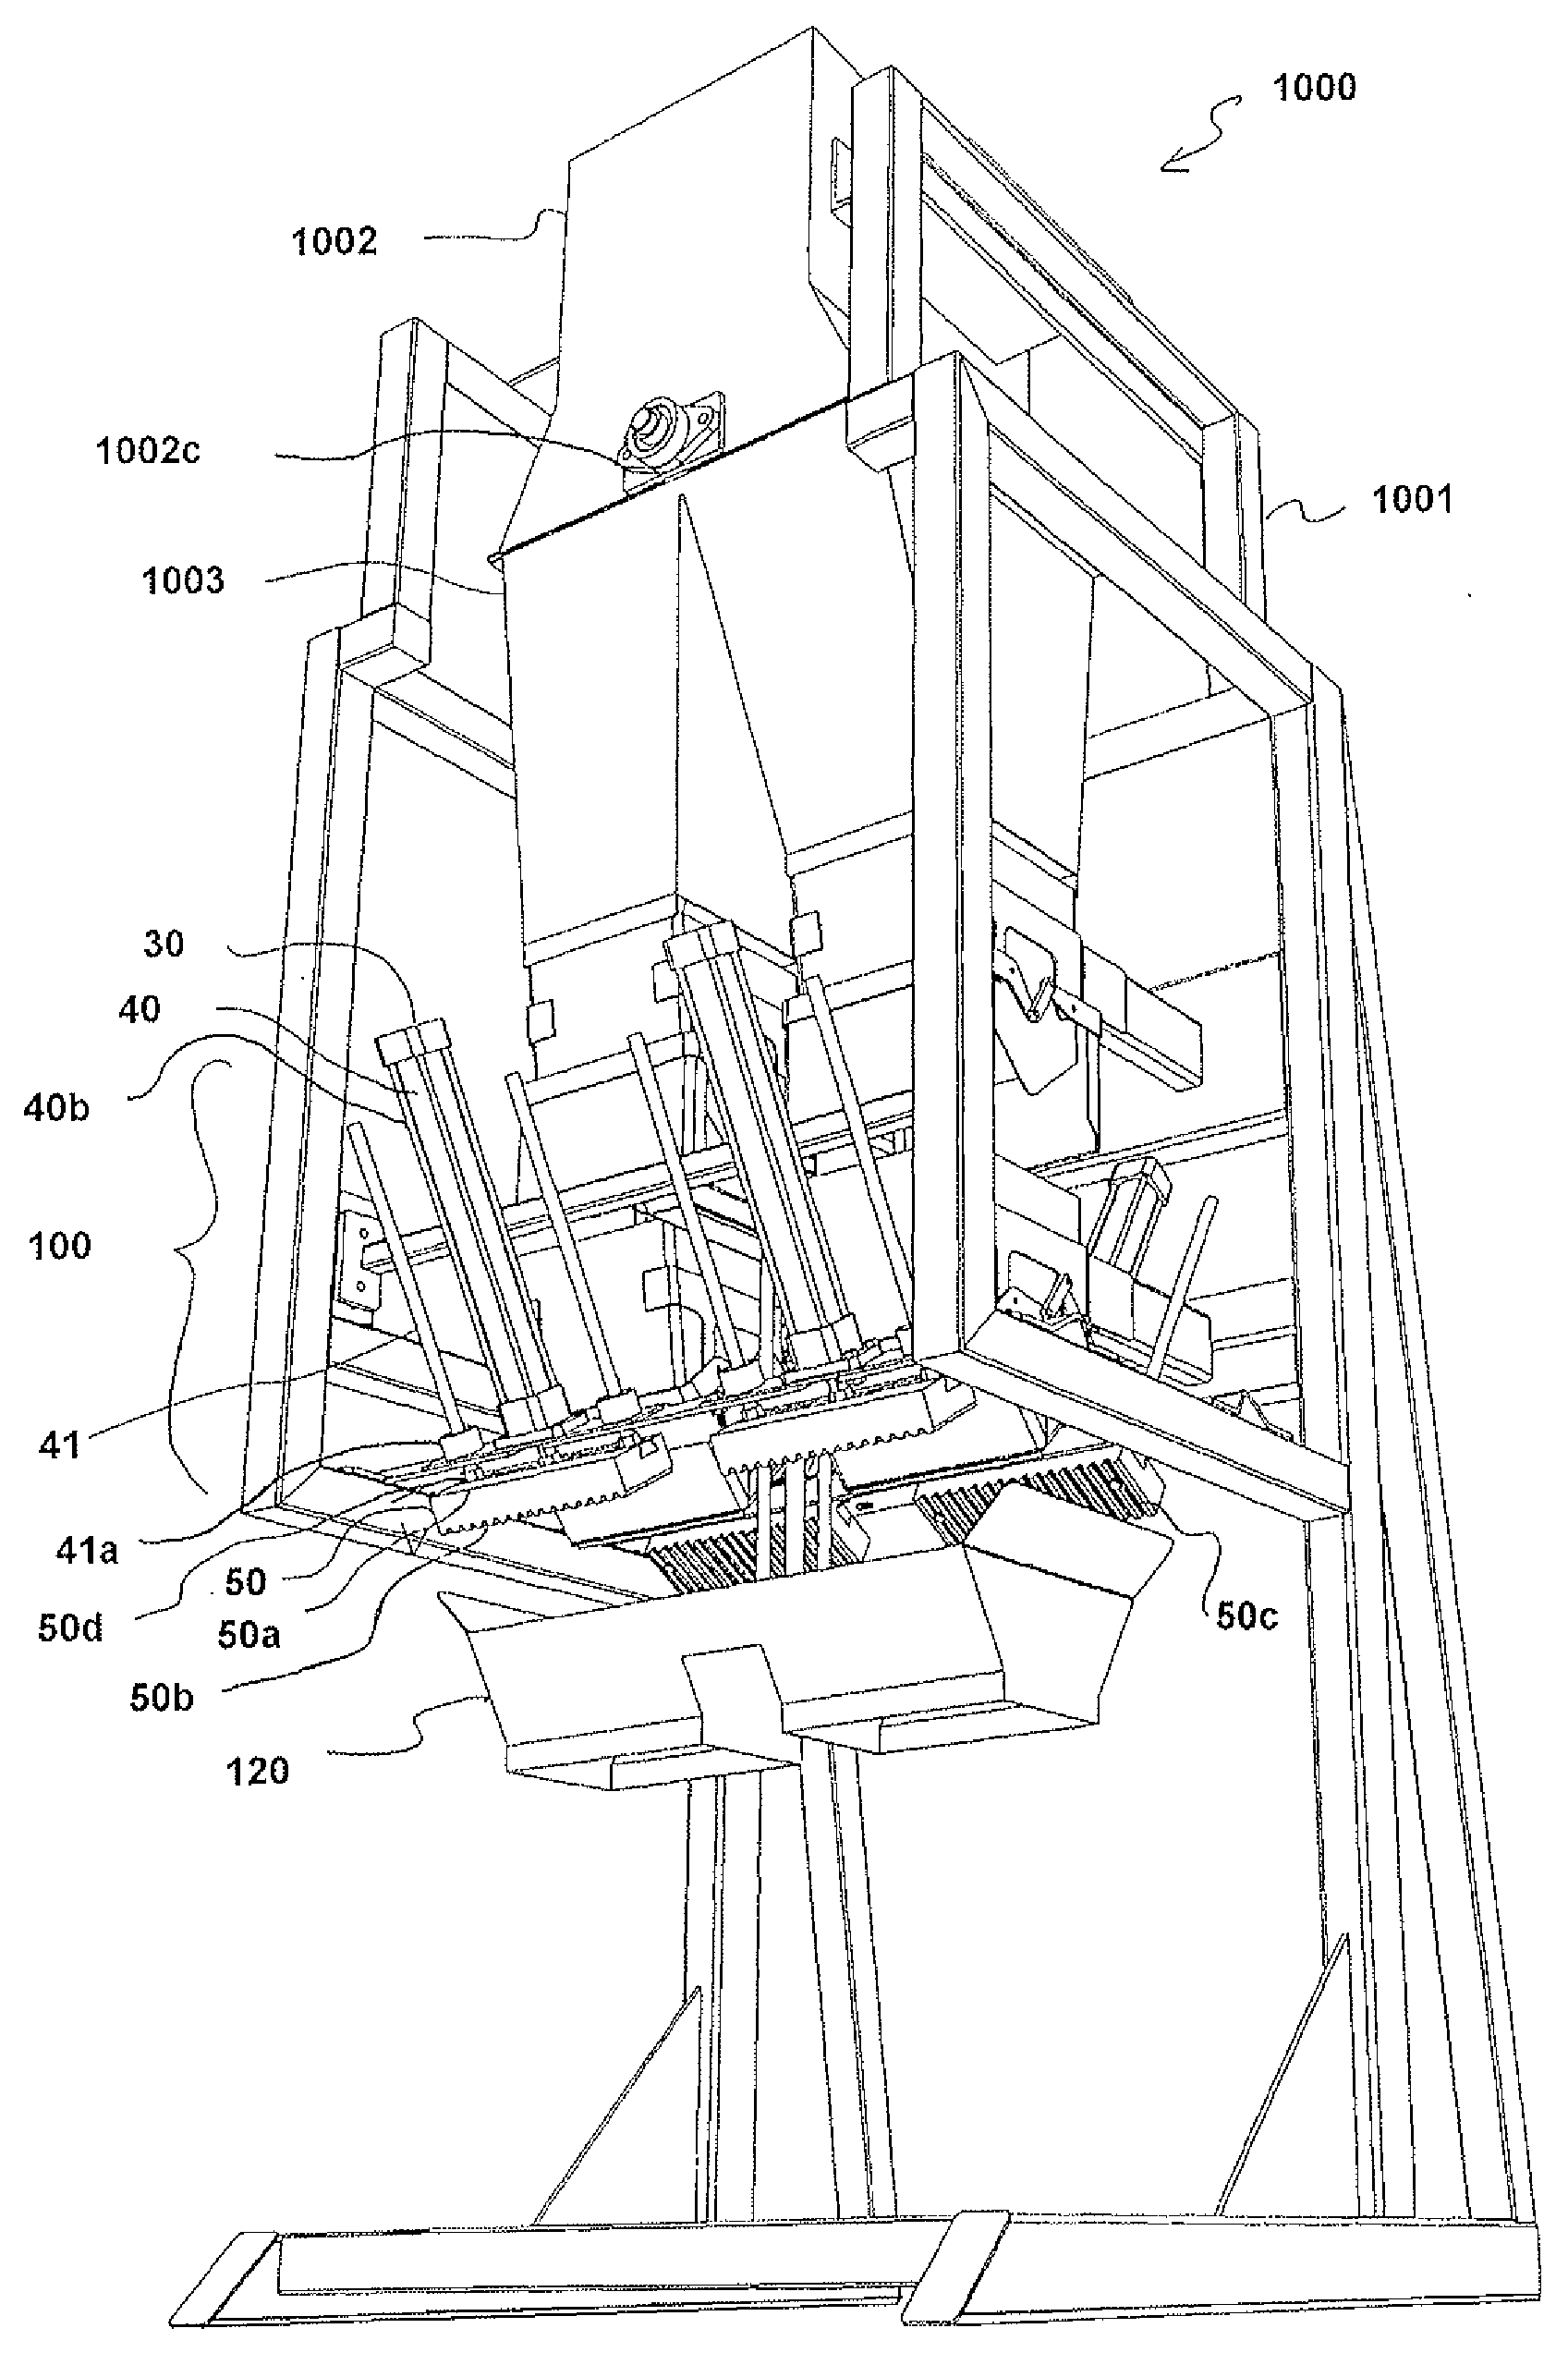 Apparatus for Packing Leafy Produce into a Tray